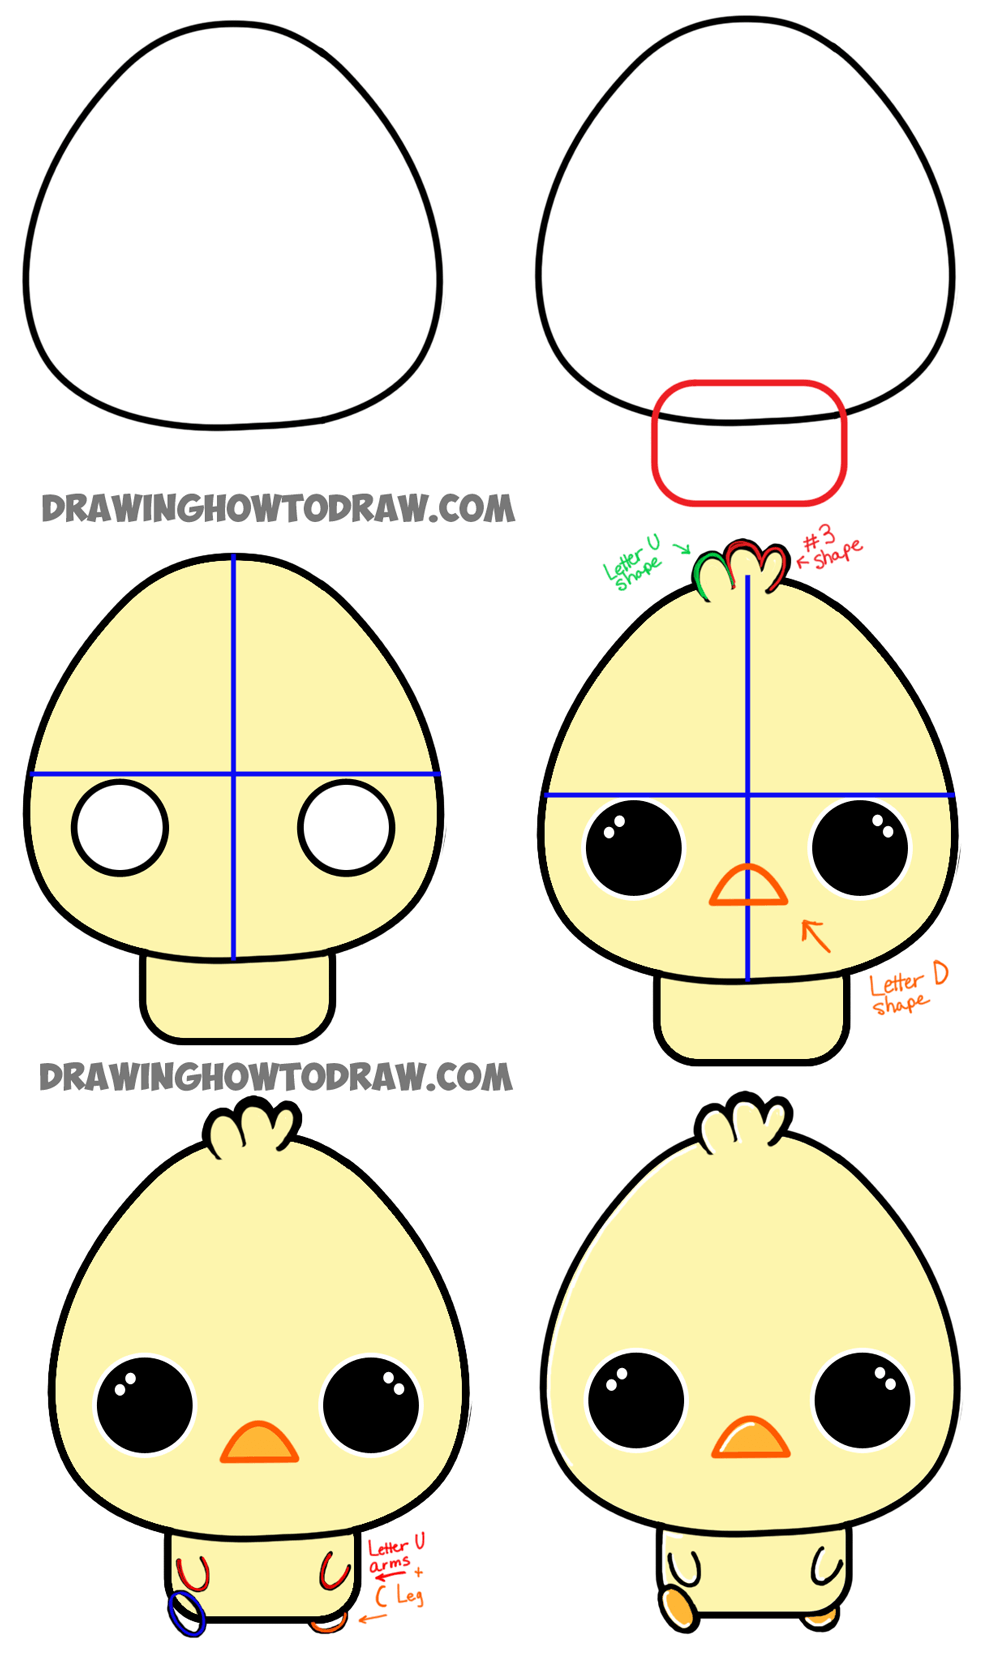 How to Draw a Cartoon Chibi Baby Chick - Easy Tutorial for Kids - How ...